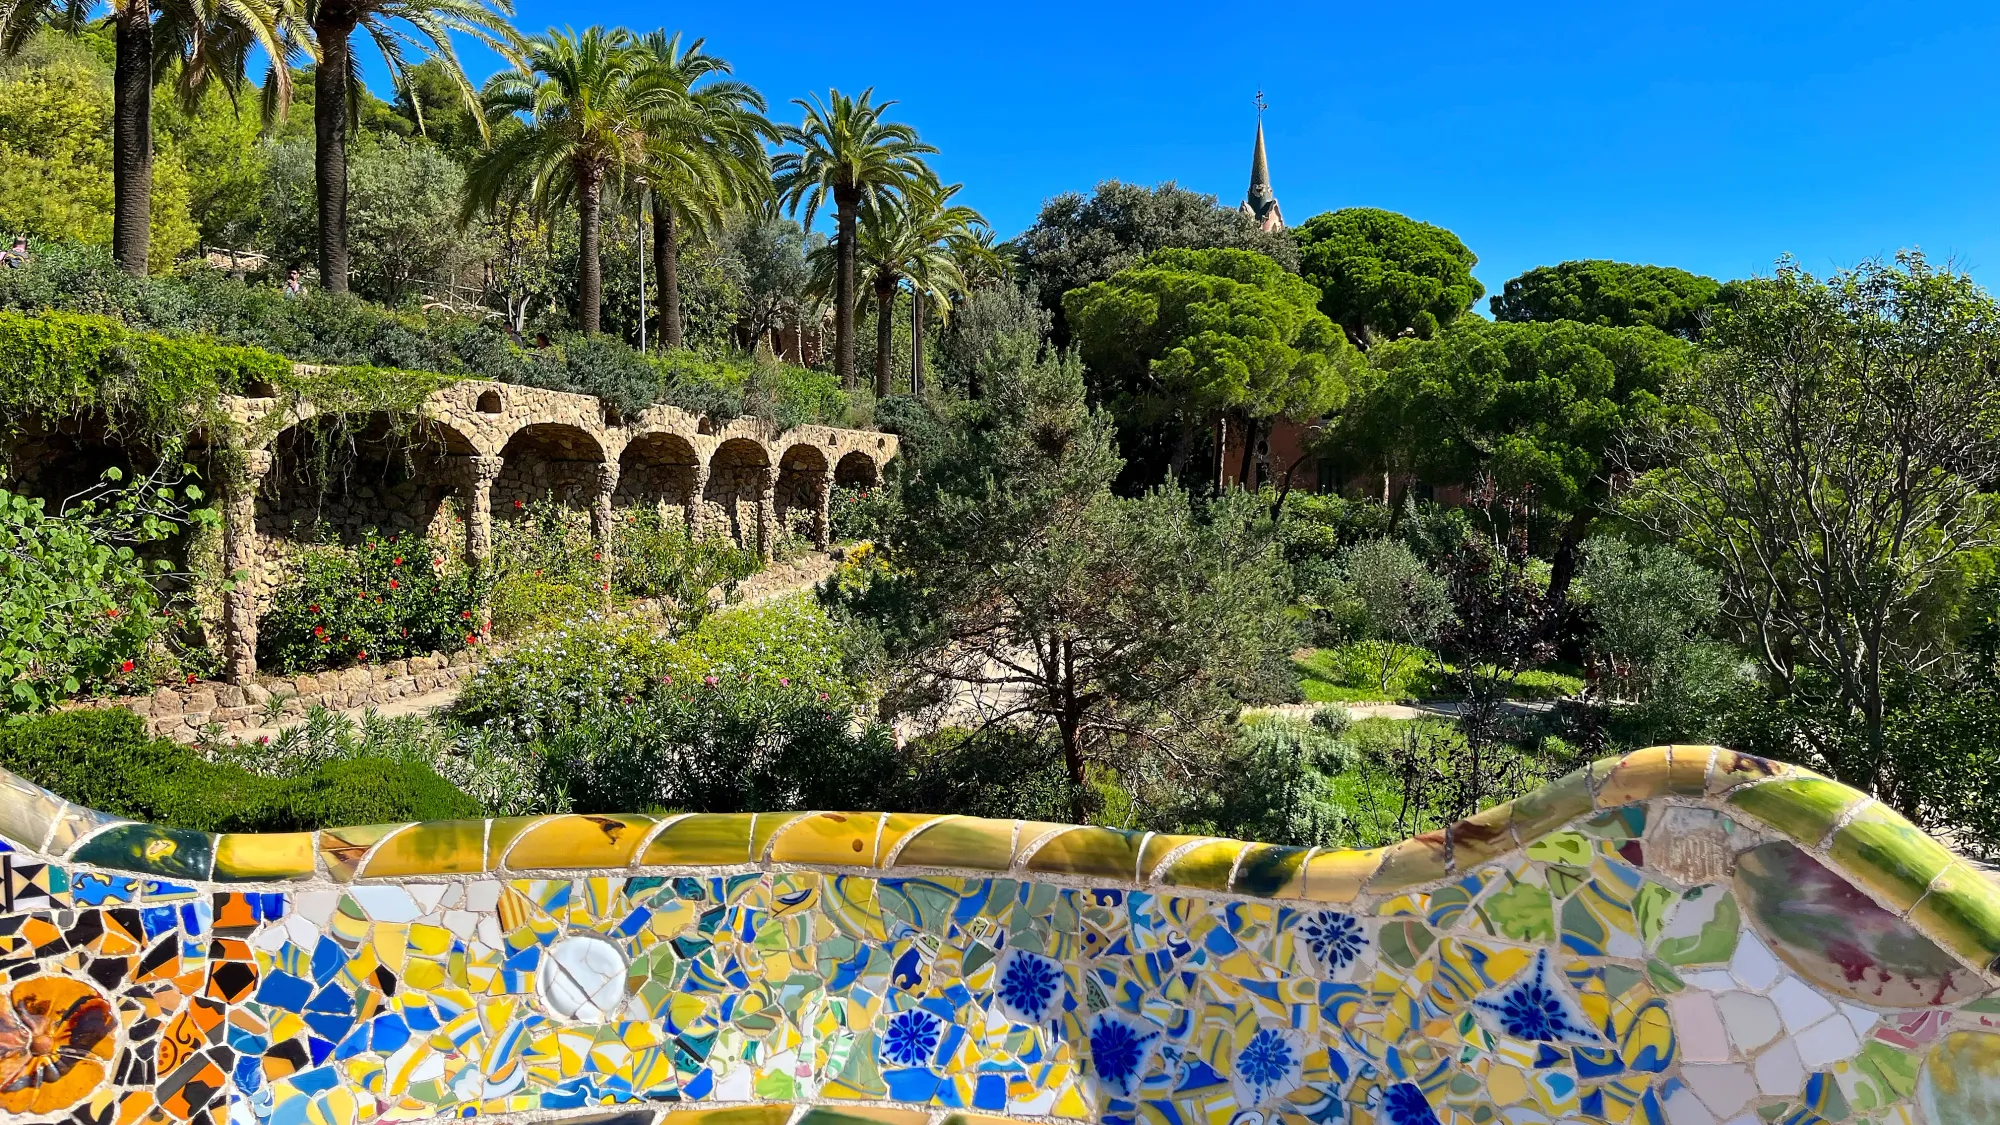 Tiled balcony overlooking a park with arches and palm trees